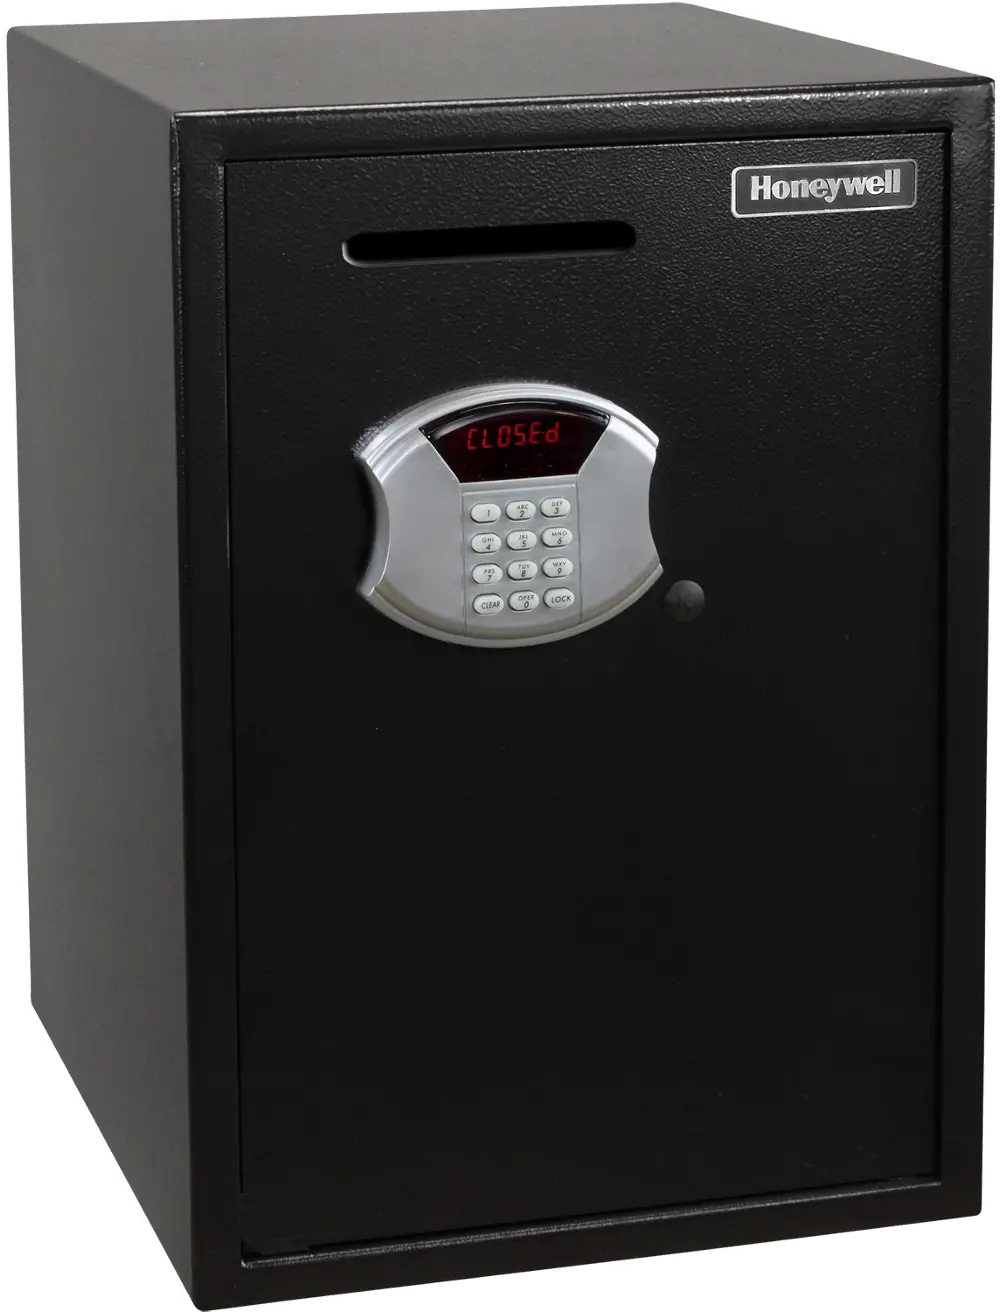 5107S Honeywell 5107S Digital Security Safe with Depository Slot-1